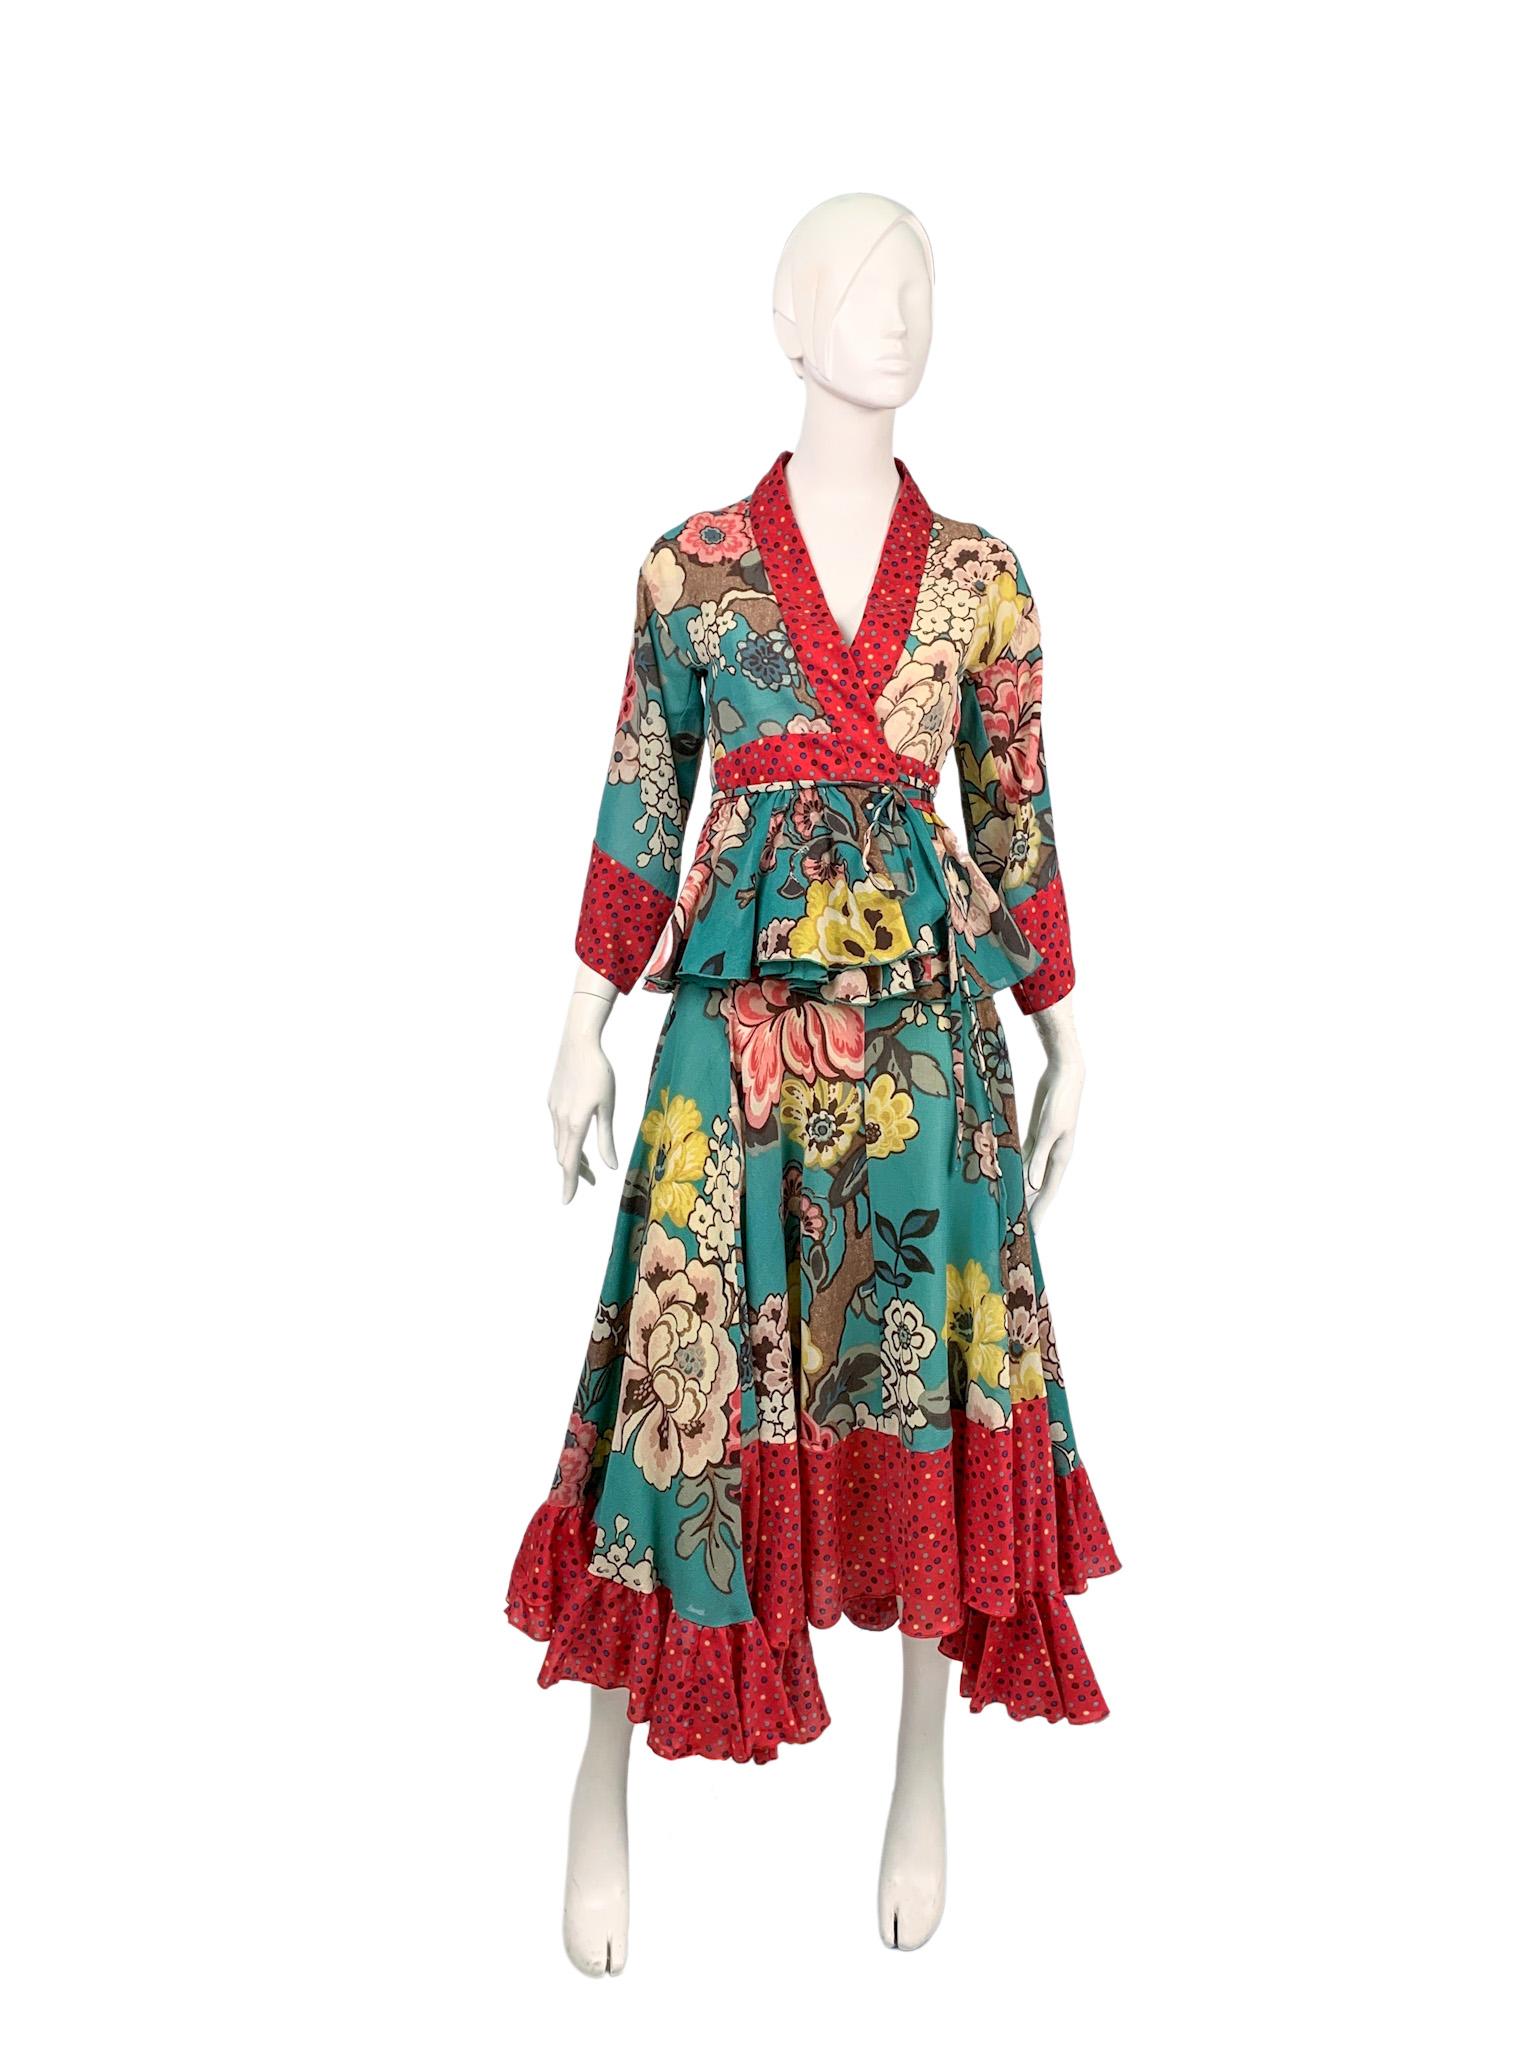 Kenzo 2-piece ensemble with an exceptional patchwork design that masterfully combines contrasting floral and polka dot prints. Includes an asymmetric ruffled skirt and a wrap kimono-style jacket/top.

100% wool; trims 70% wool 30% silk; skirt lining